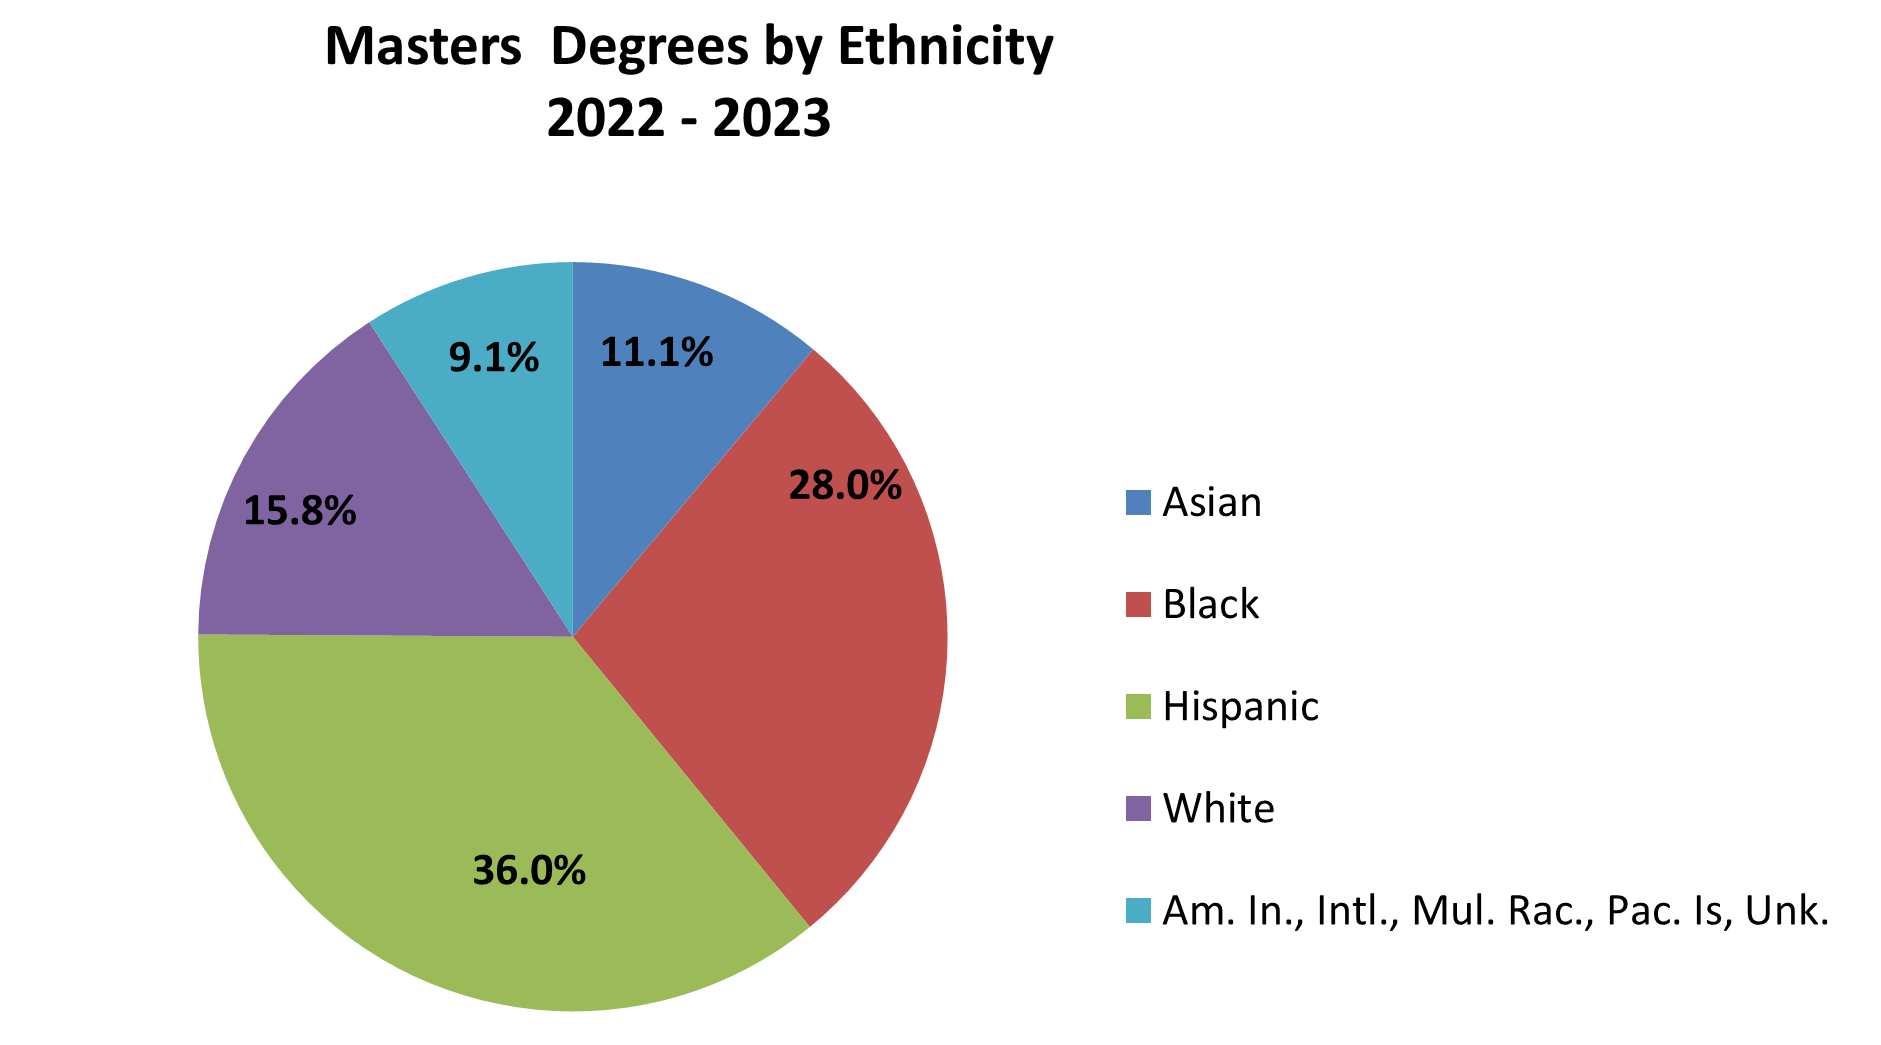 Masters Degrees by Ethnicity pie chart